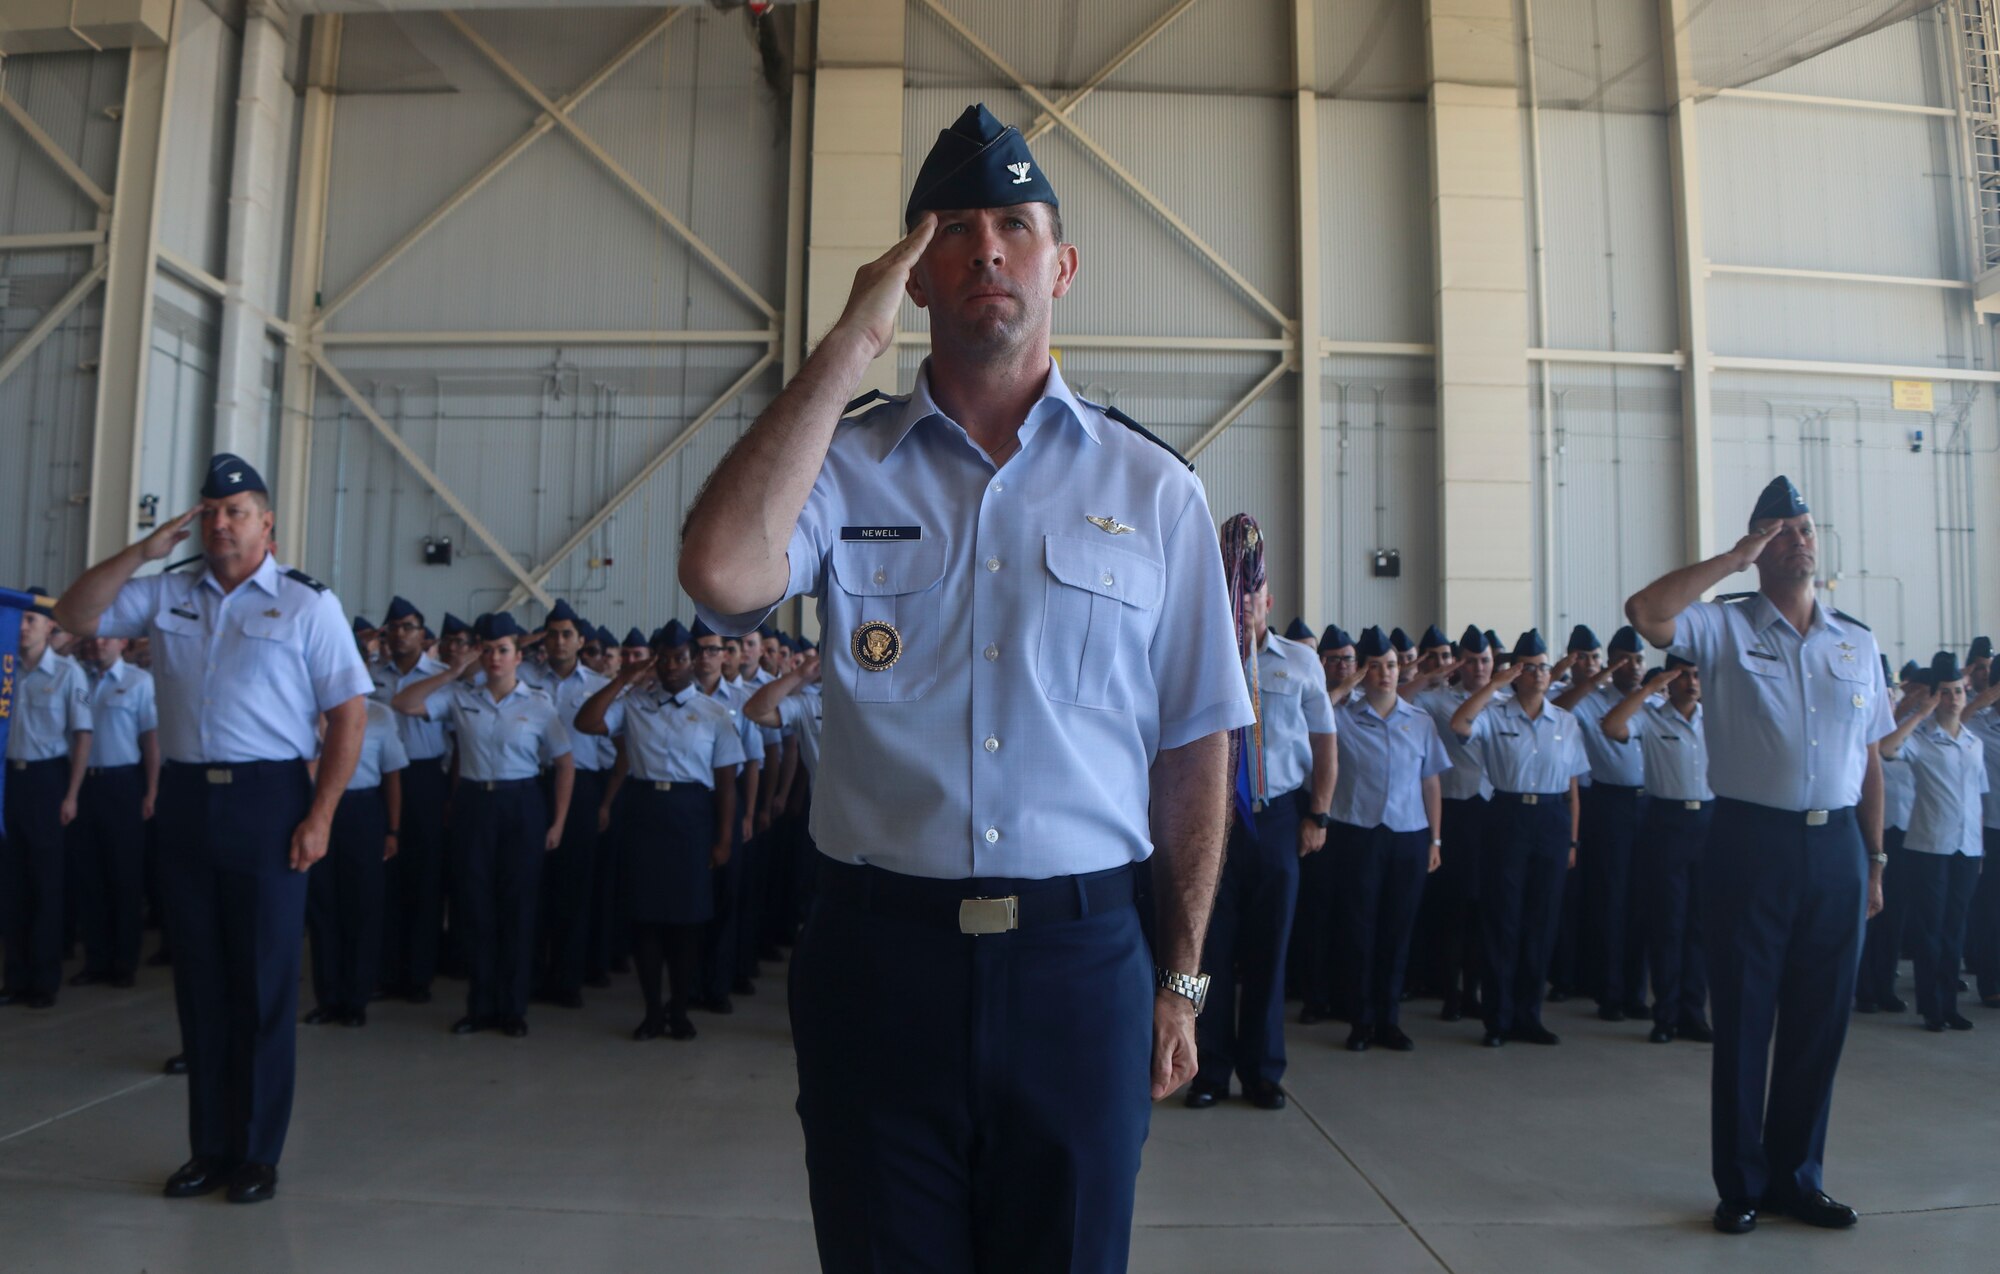 7th Bomb Wing welcomes new commander